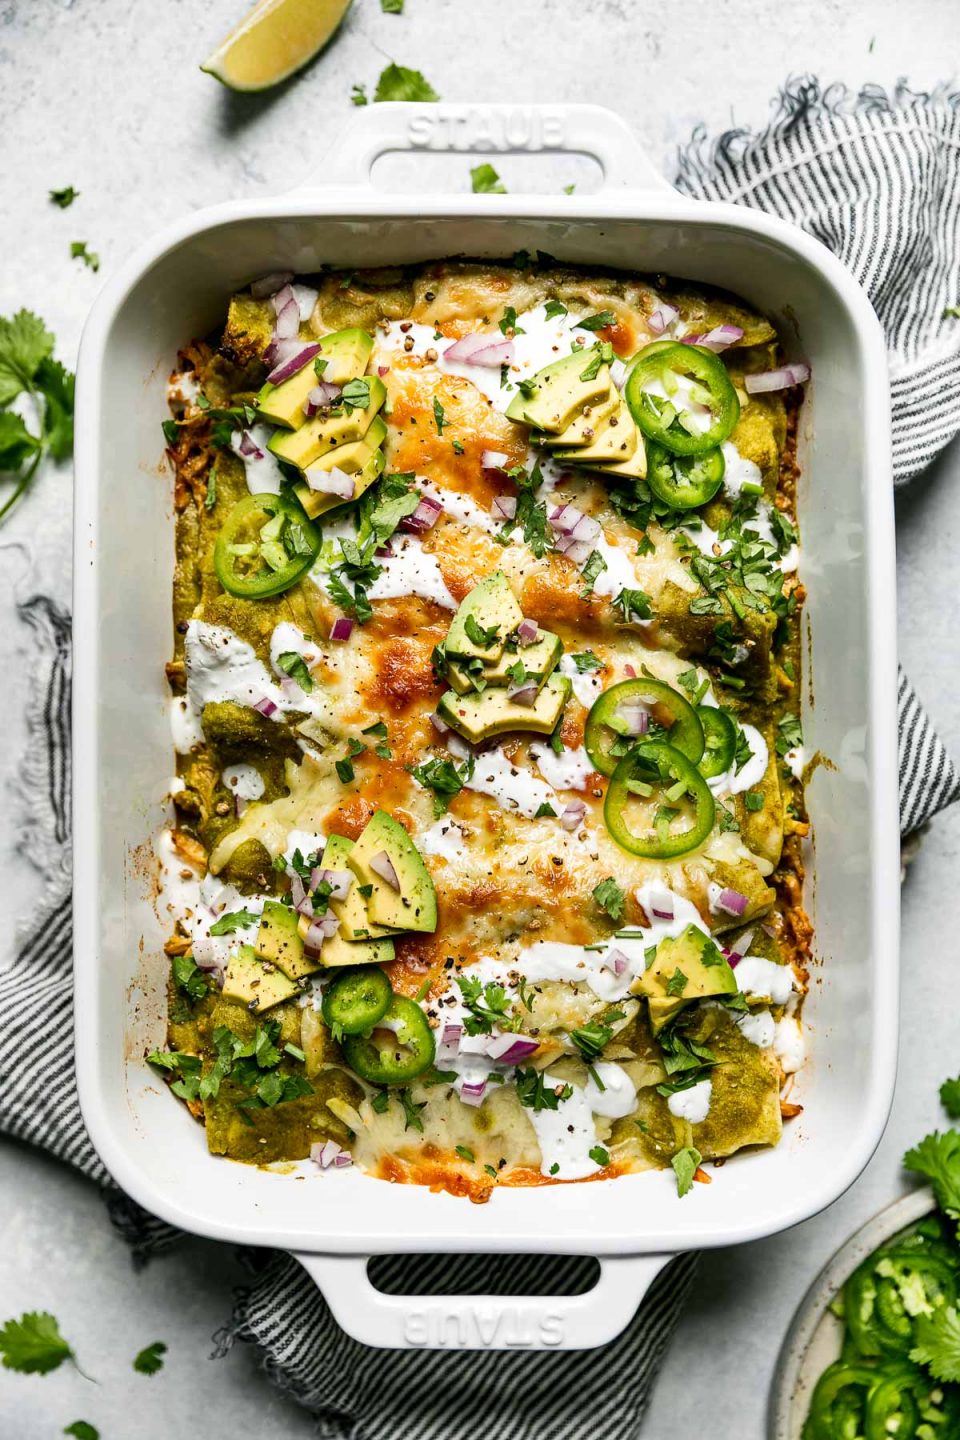 Baked green enchiladas covered in cheeese, red onion, avocado, & sliced jalapeno. The baking dish sits atop a striped gray linen napkin on a light blue surface, surrounded by cilantro leaves, lime wedges, & a small plate of garnishes (lime wedges, cilantro, sliced jalapeno, etc.)